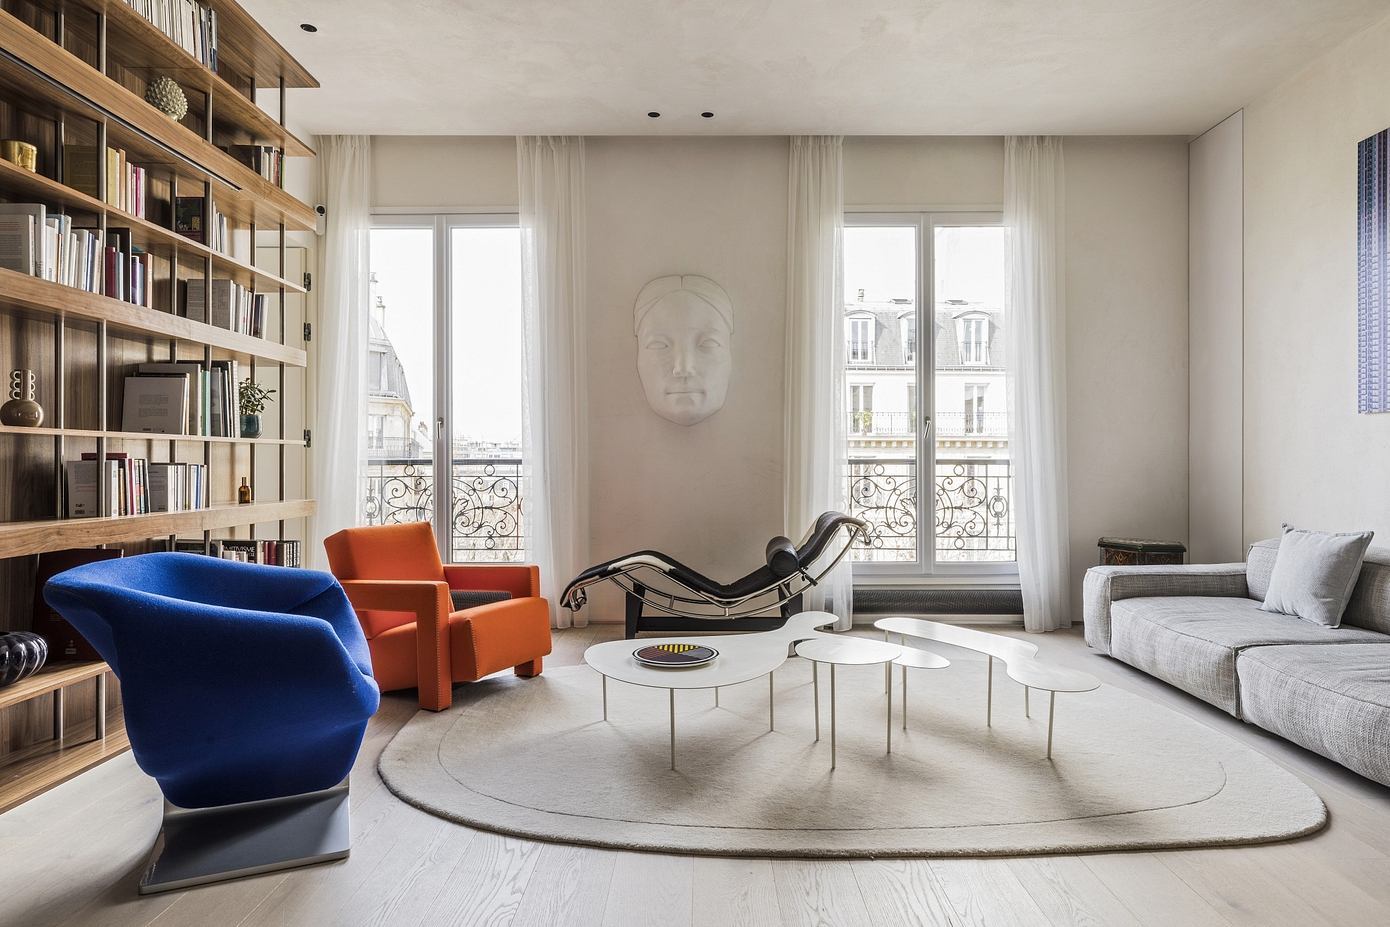 House for 2 Architects: Renovating a 19th-Century Paris Apartment